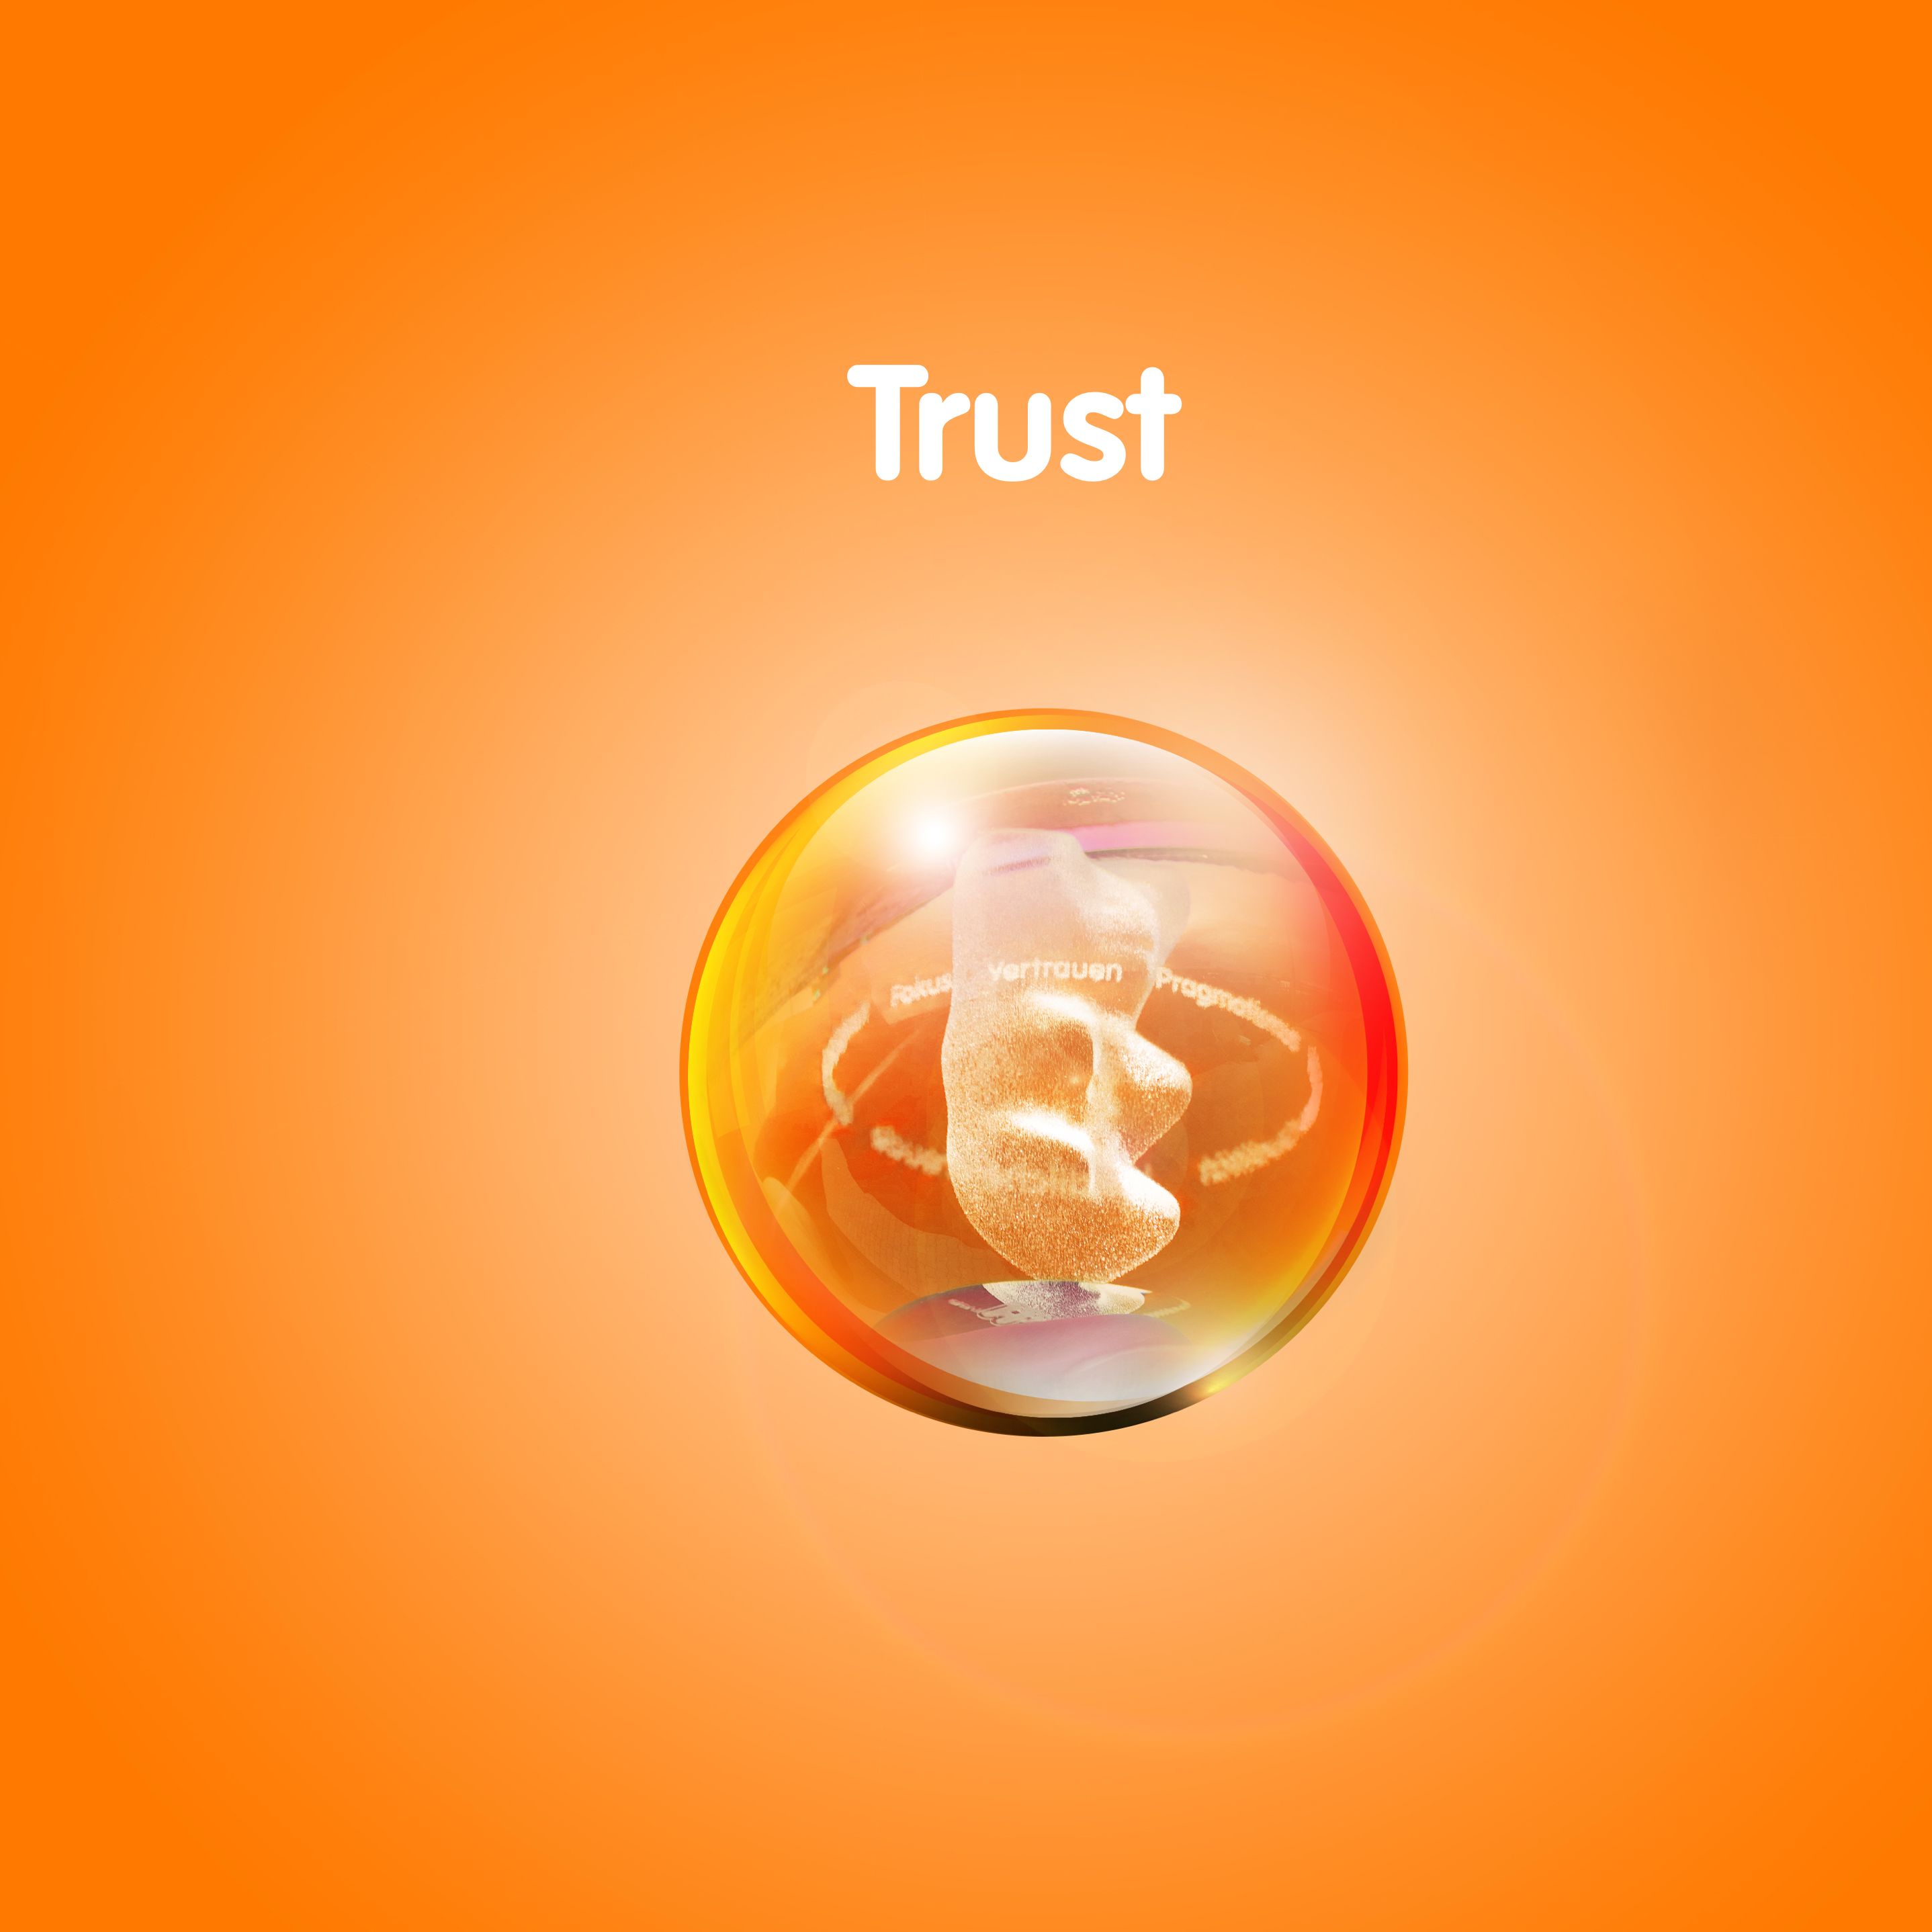 Graphic with Goldbear in transparent ball against orange background with text: ‘Trust’